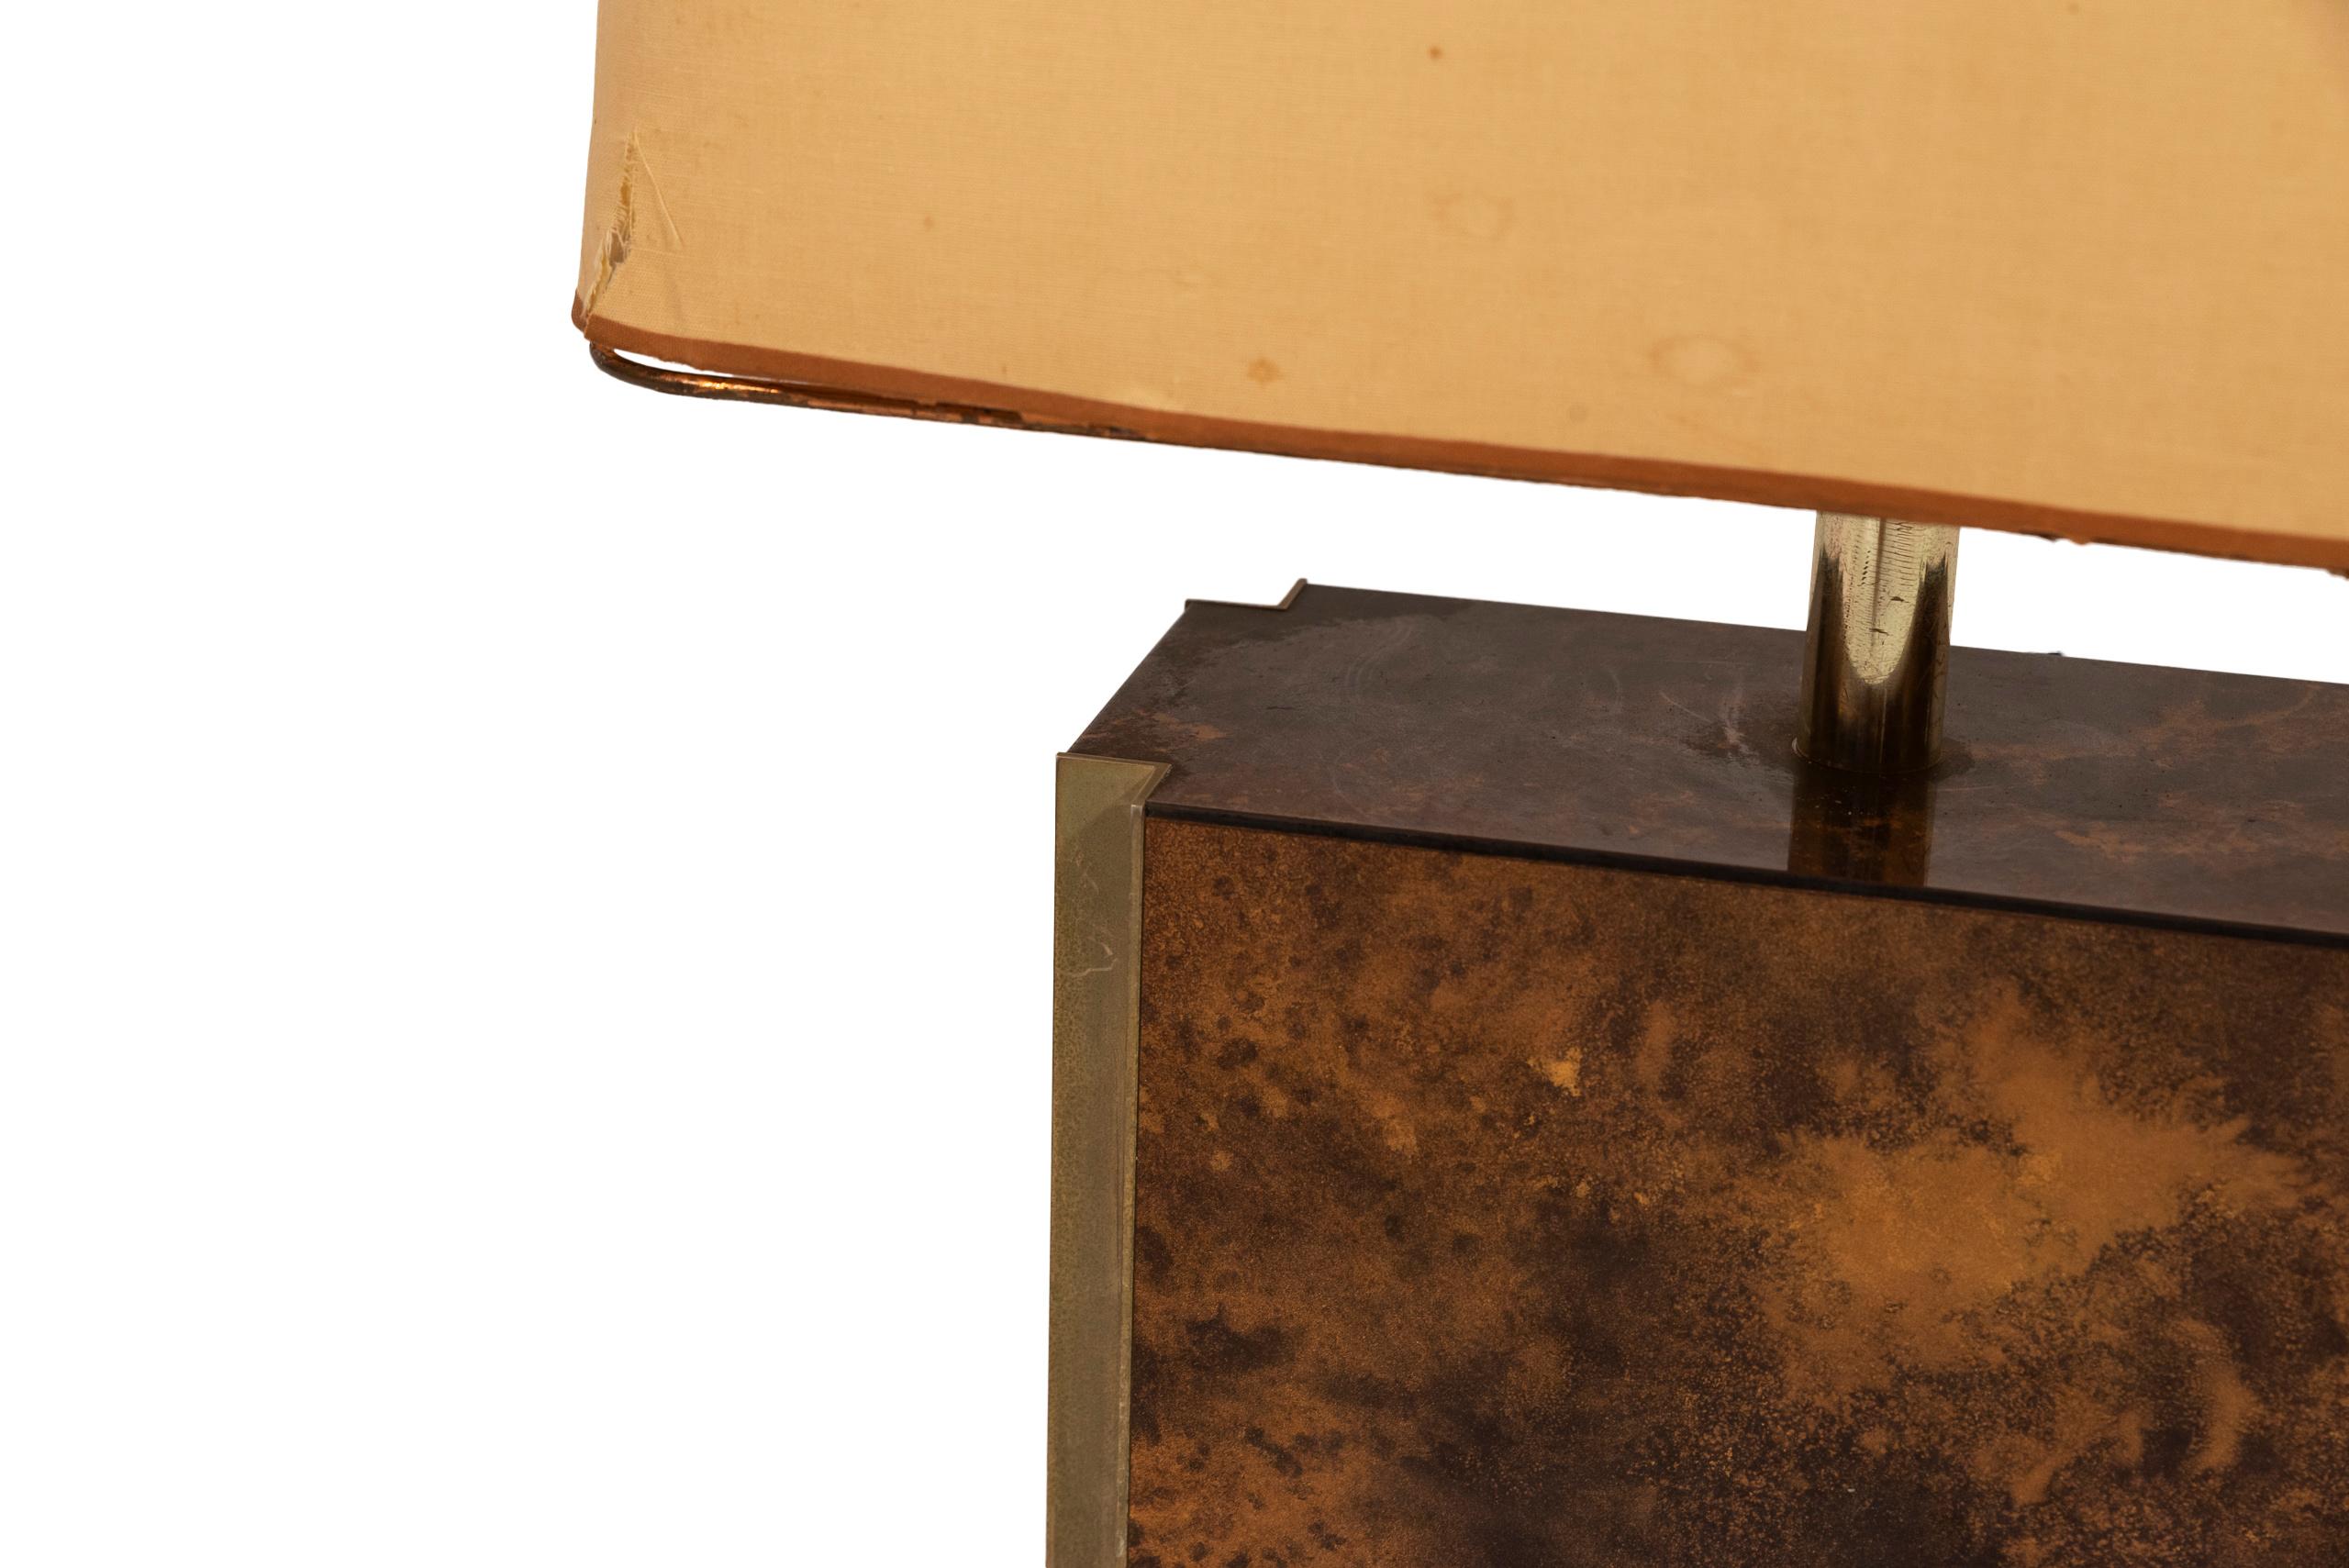 Guy Lefevre for Jansen,
pair of table lamps,
amber lacquer and gilded brass, circa 1970, France.
Measures: Height 59 cm, width 40 cm, depth 19 cm.